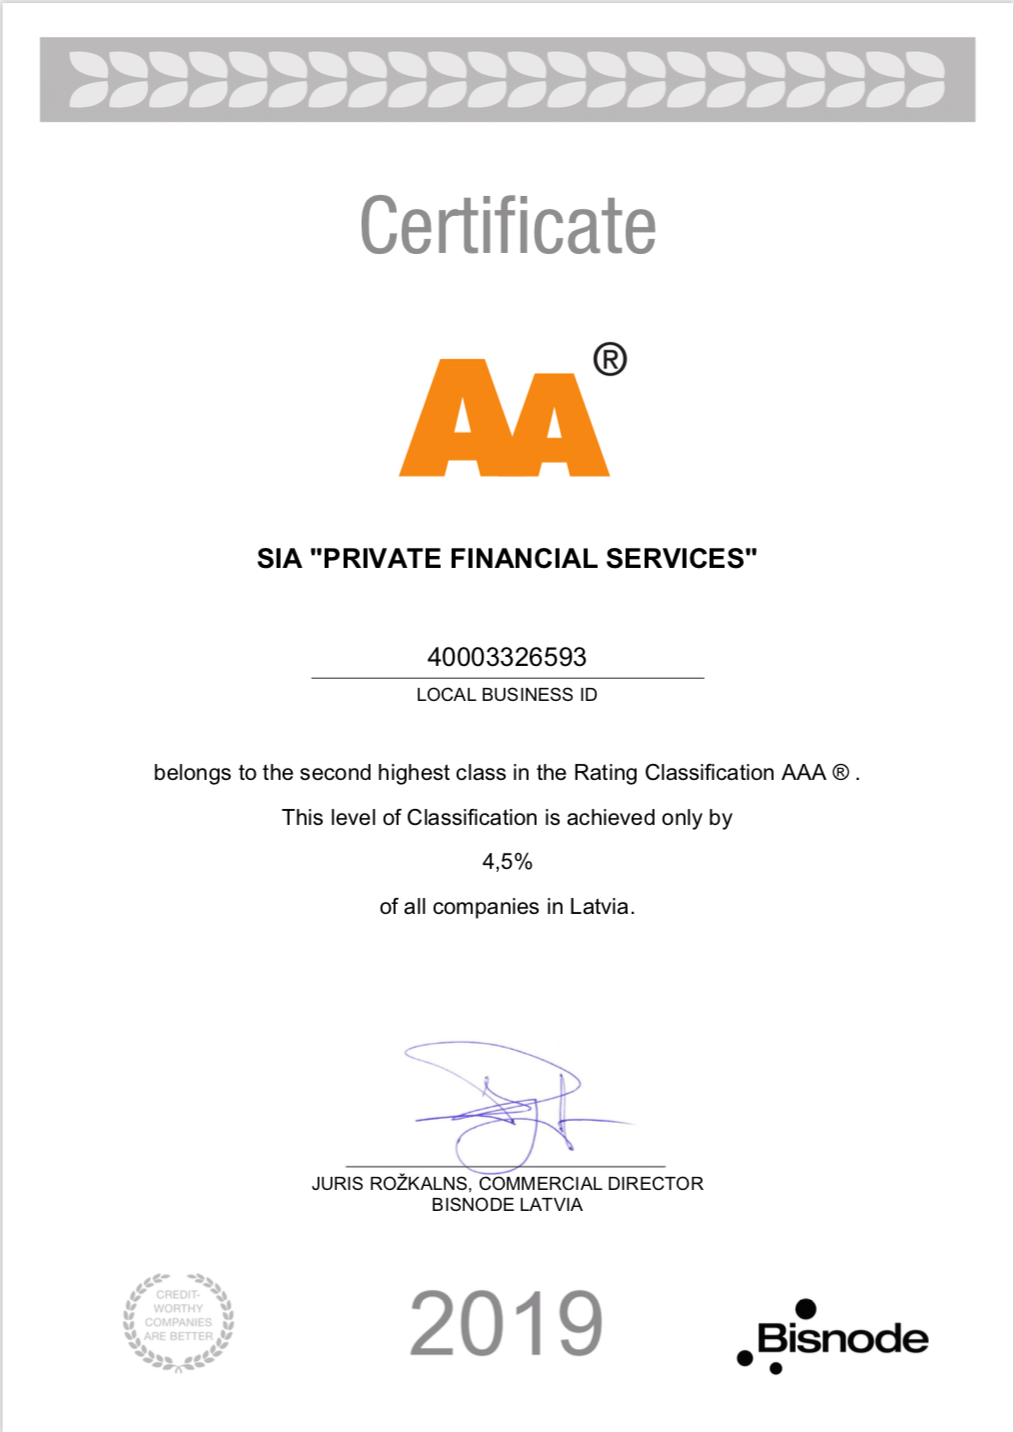 Credit Rating Double-A is Achieved by Private Financial Services Latvia